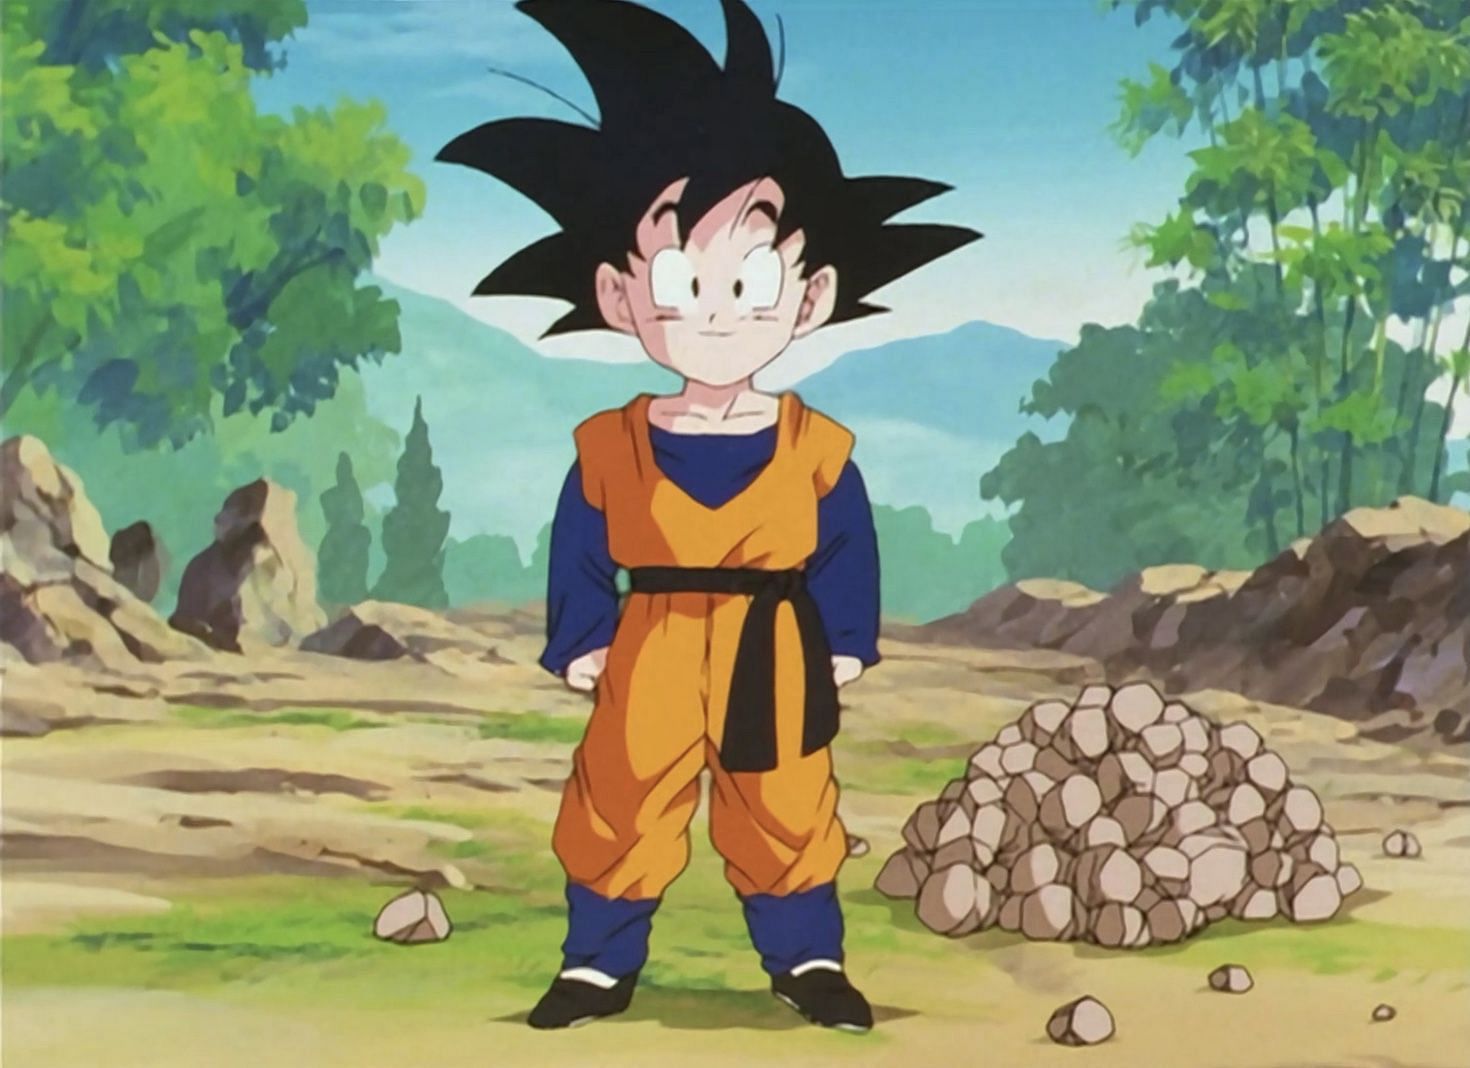 Goten as he appears in the Z anime (Image via Toei Animation)